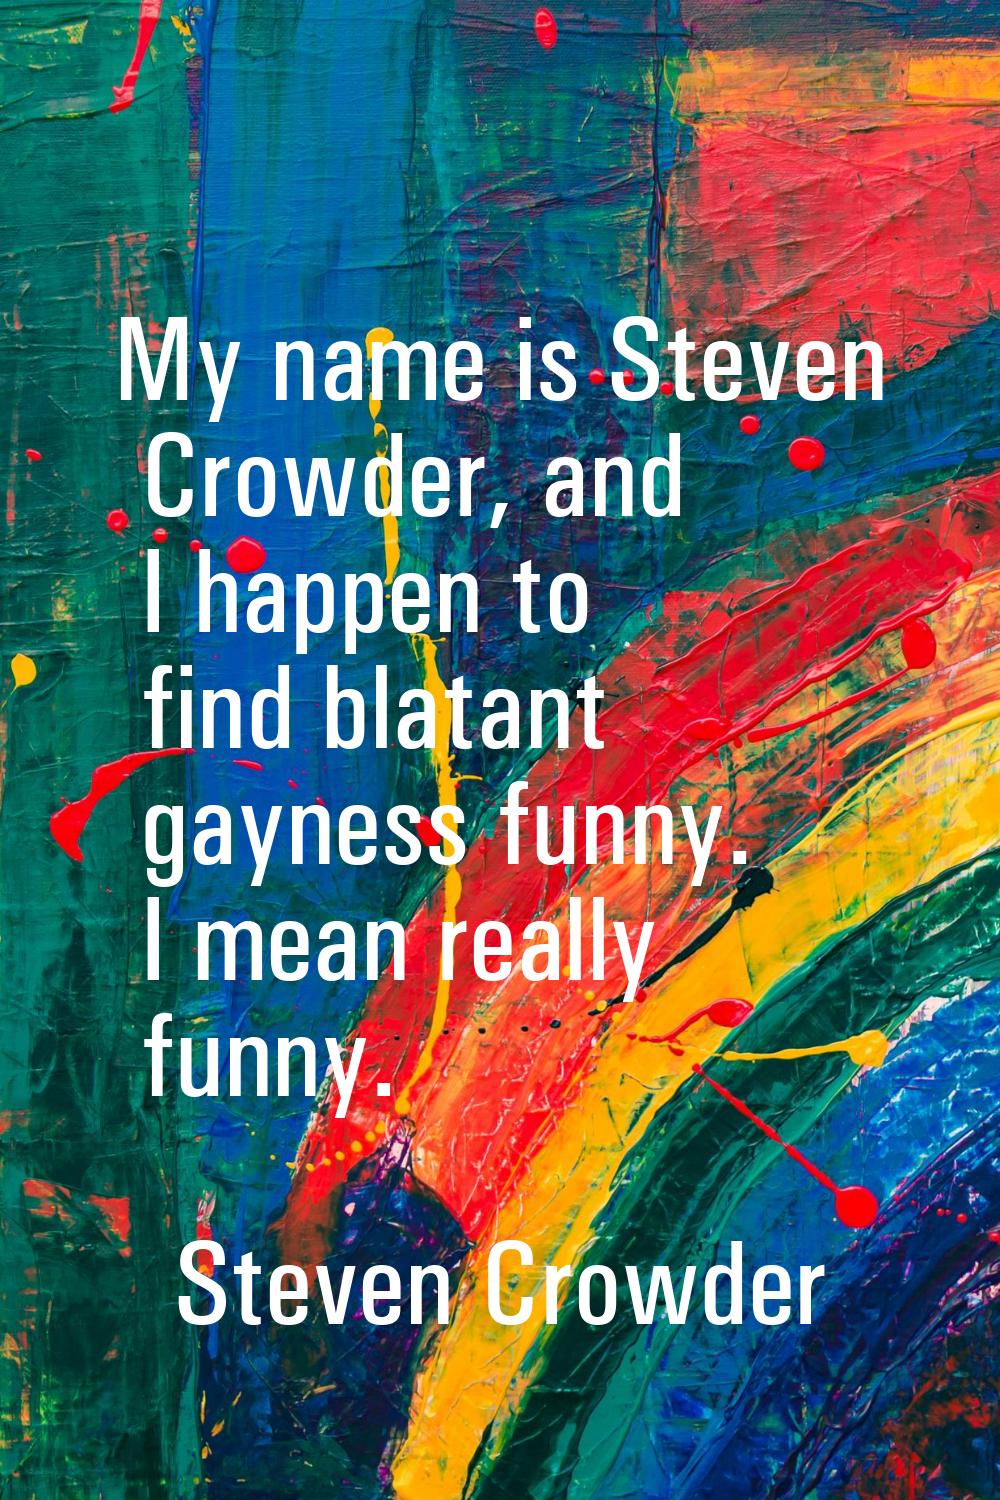 My name is Steven Crowder, and I happen to find blatant gayness funny. I mean really funny.